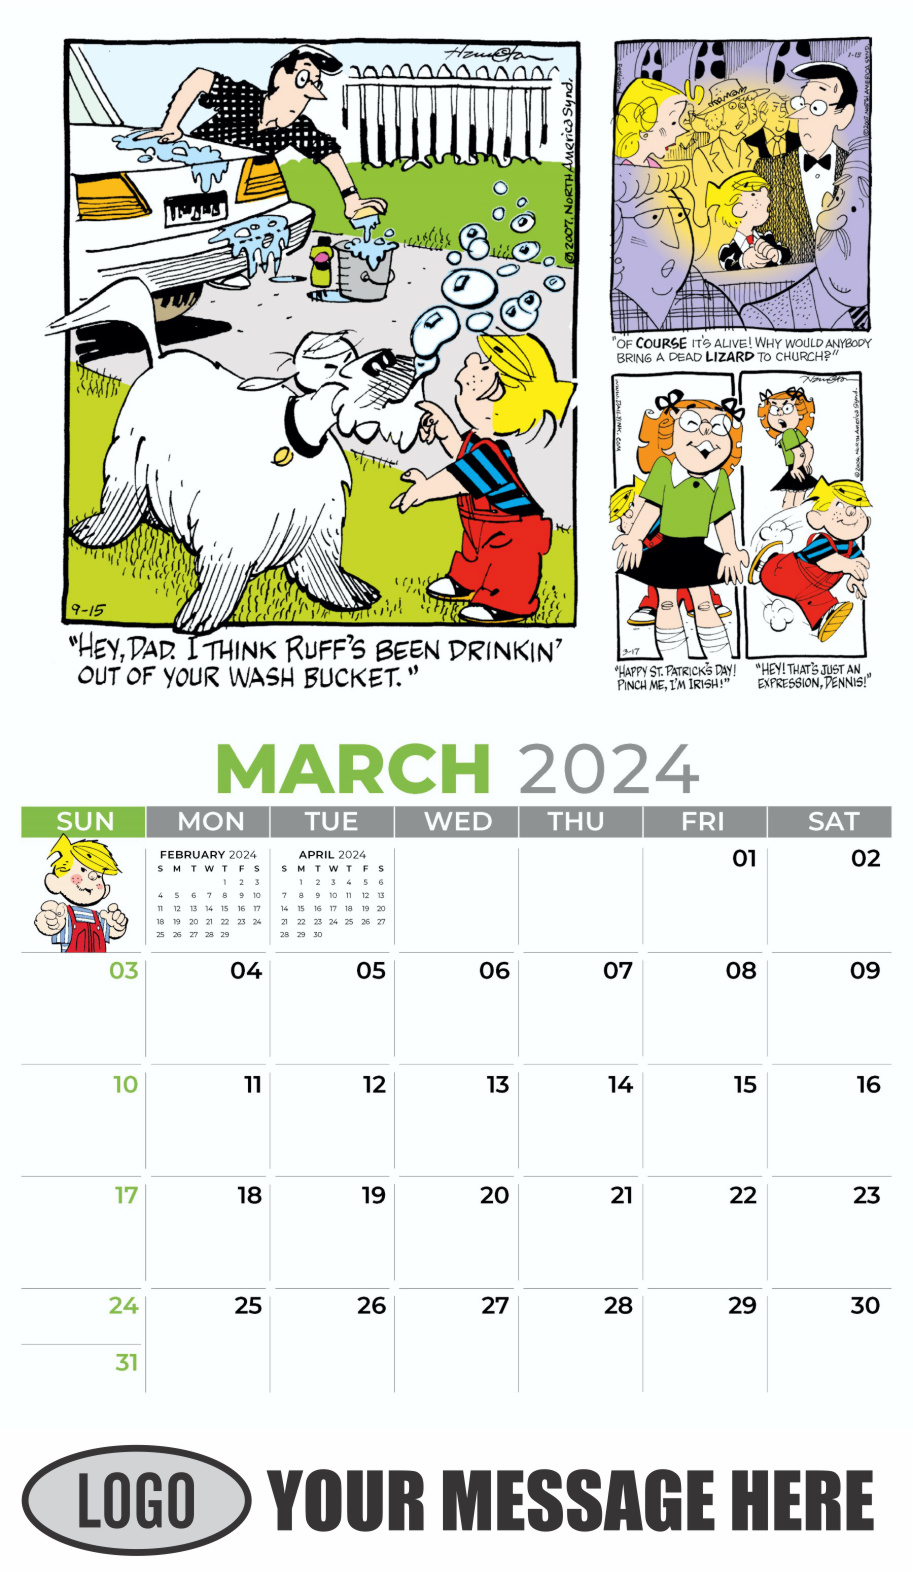 Dennis the Menace 2024 Business Promotional Wall Calendar - March